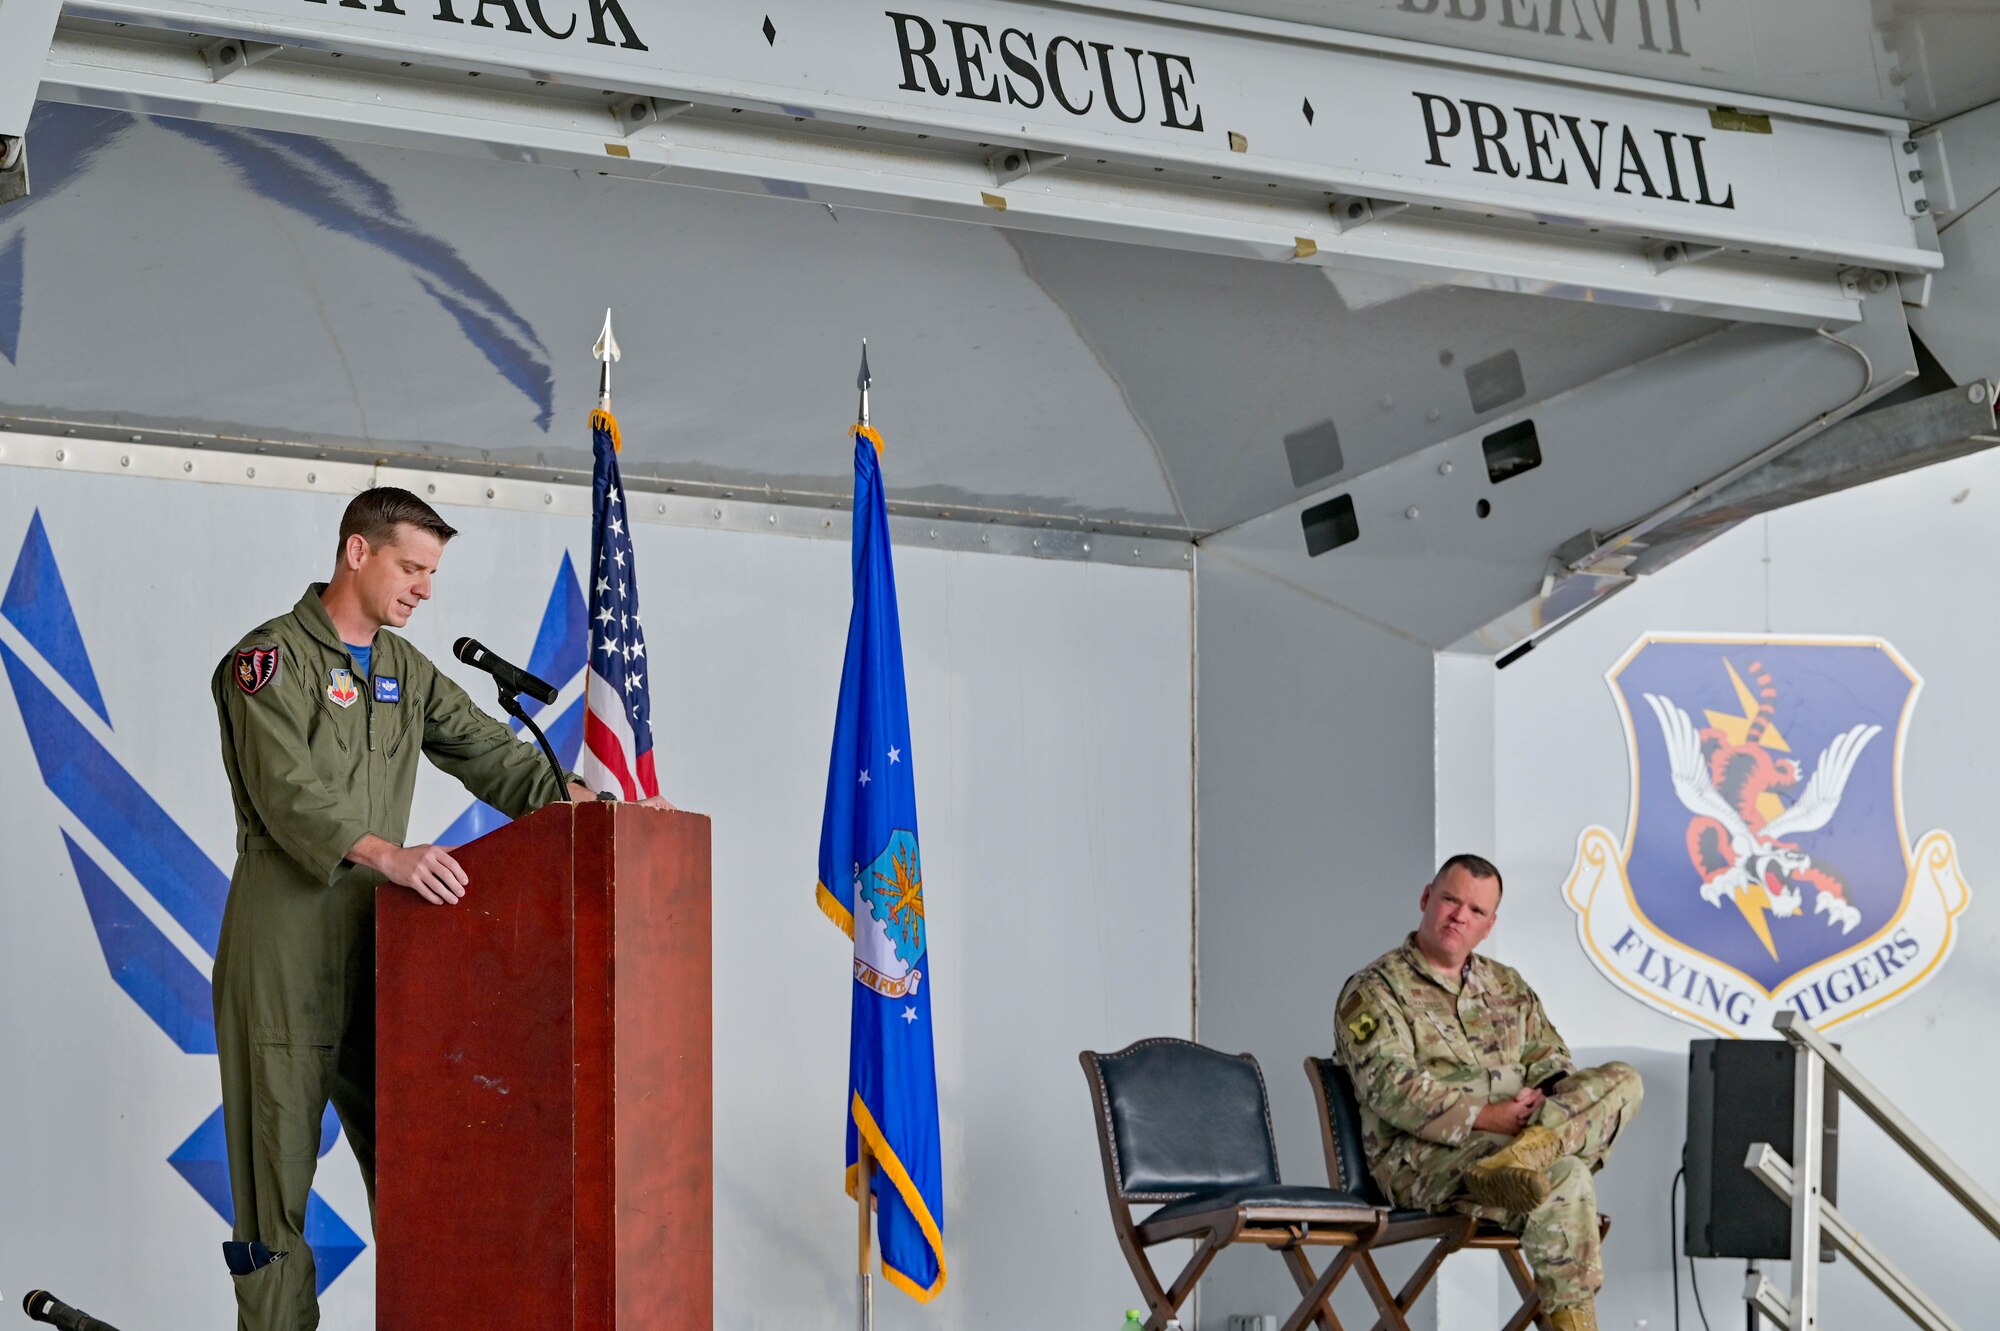 U.S. Air Force Col. Russell Cook, 23rd Wing commander, gives a speech during the HH-60W Jolly Green II Initial Operational Capability ceremony, Sept. 9, 2022 at Moody Air Force Base, Georgia. Cook believes the future of Air Force Rescue is secure and Moody's team is ready to recover anybody, anytime, anywhere against any adversary. The ceremony displayed the platform’s operational capabilities and signifies that the HH-60W has met the criteria for IOC and awaits declaration. (U.S. Air Force photo by Senior Airman Rebeckah Medeiros)